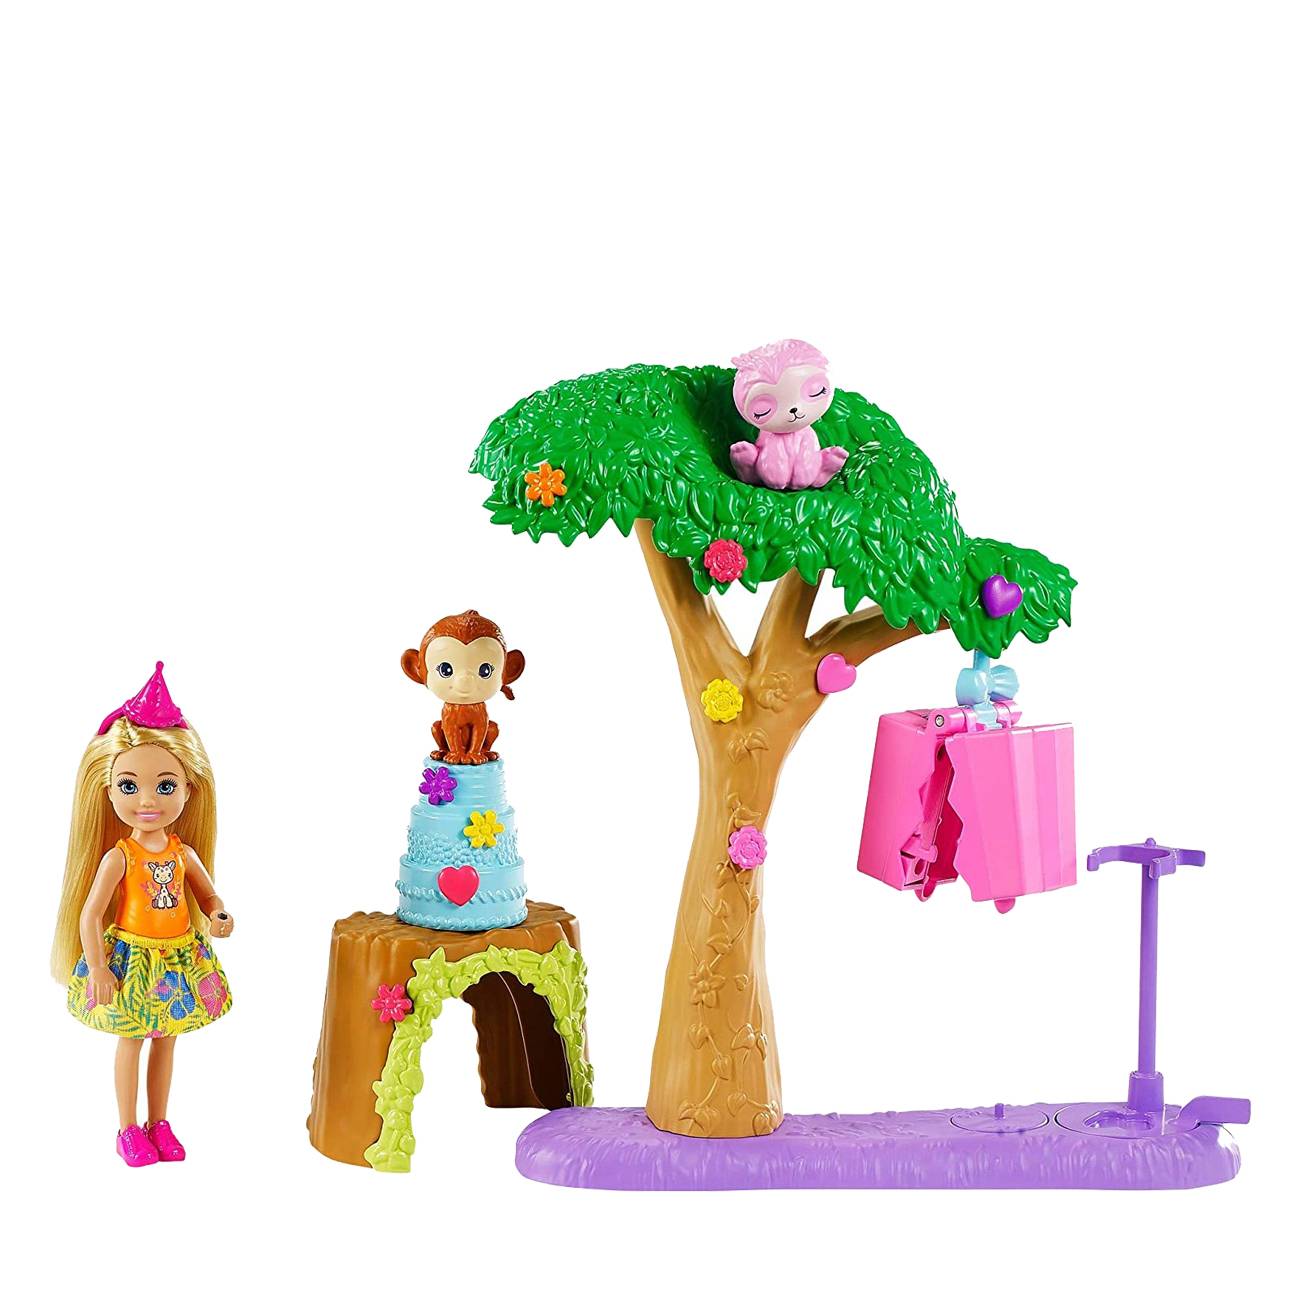 Barbie and Chelsea The Lost Birthday Party Fun Playset bestvalue.eu